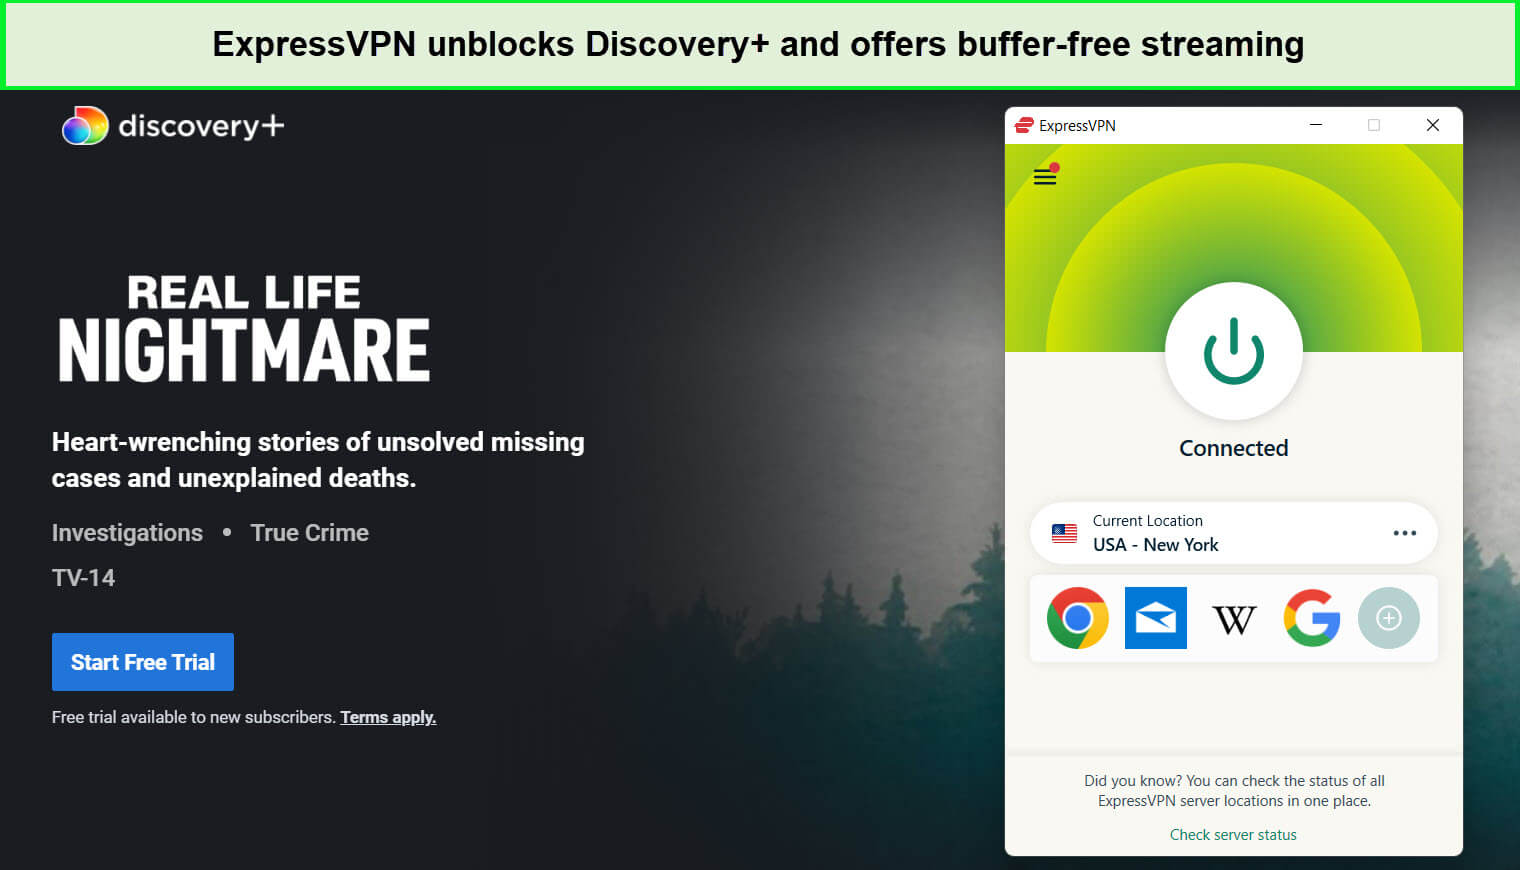 expressvpn-unblocks-real-life-nightmare-on-discovery-plus-in-ca